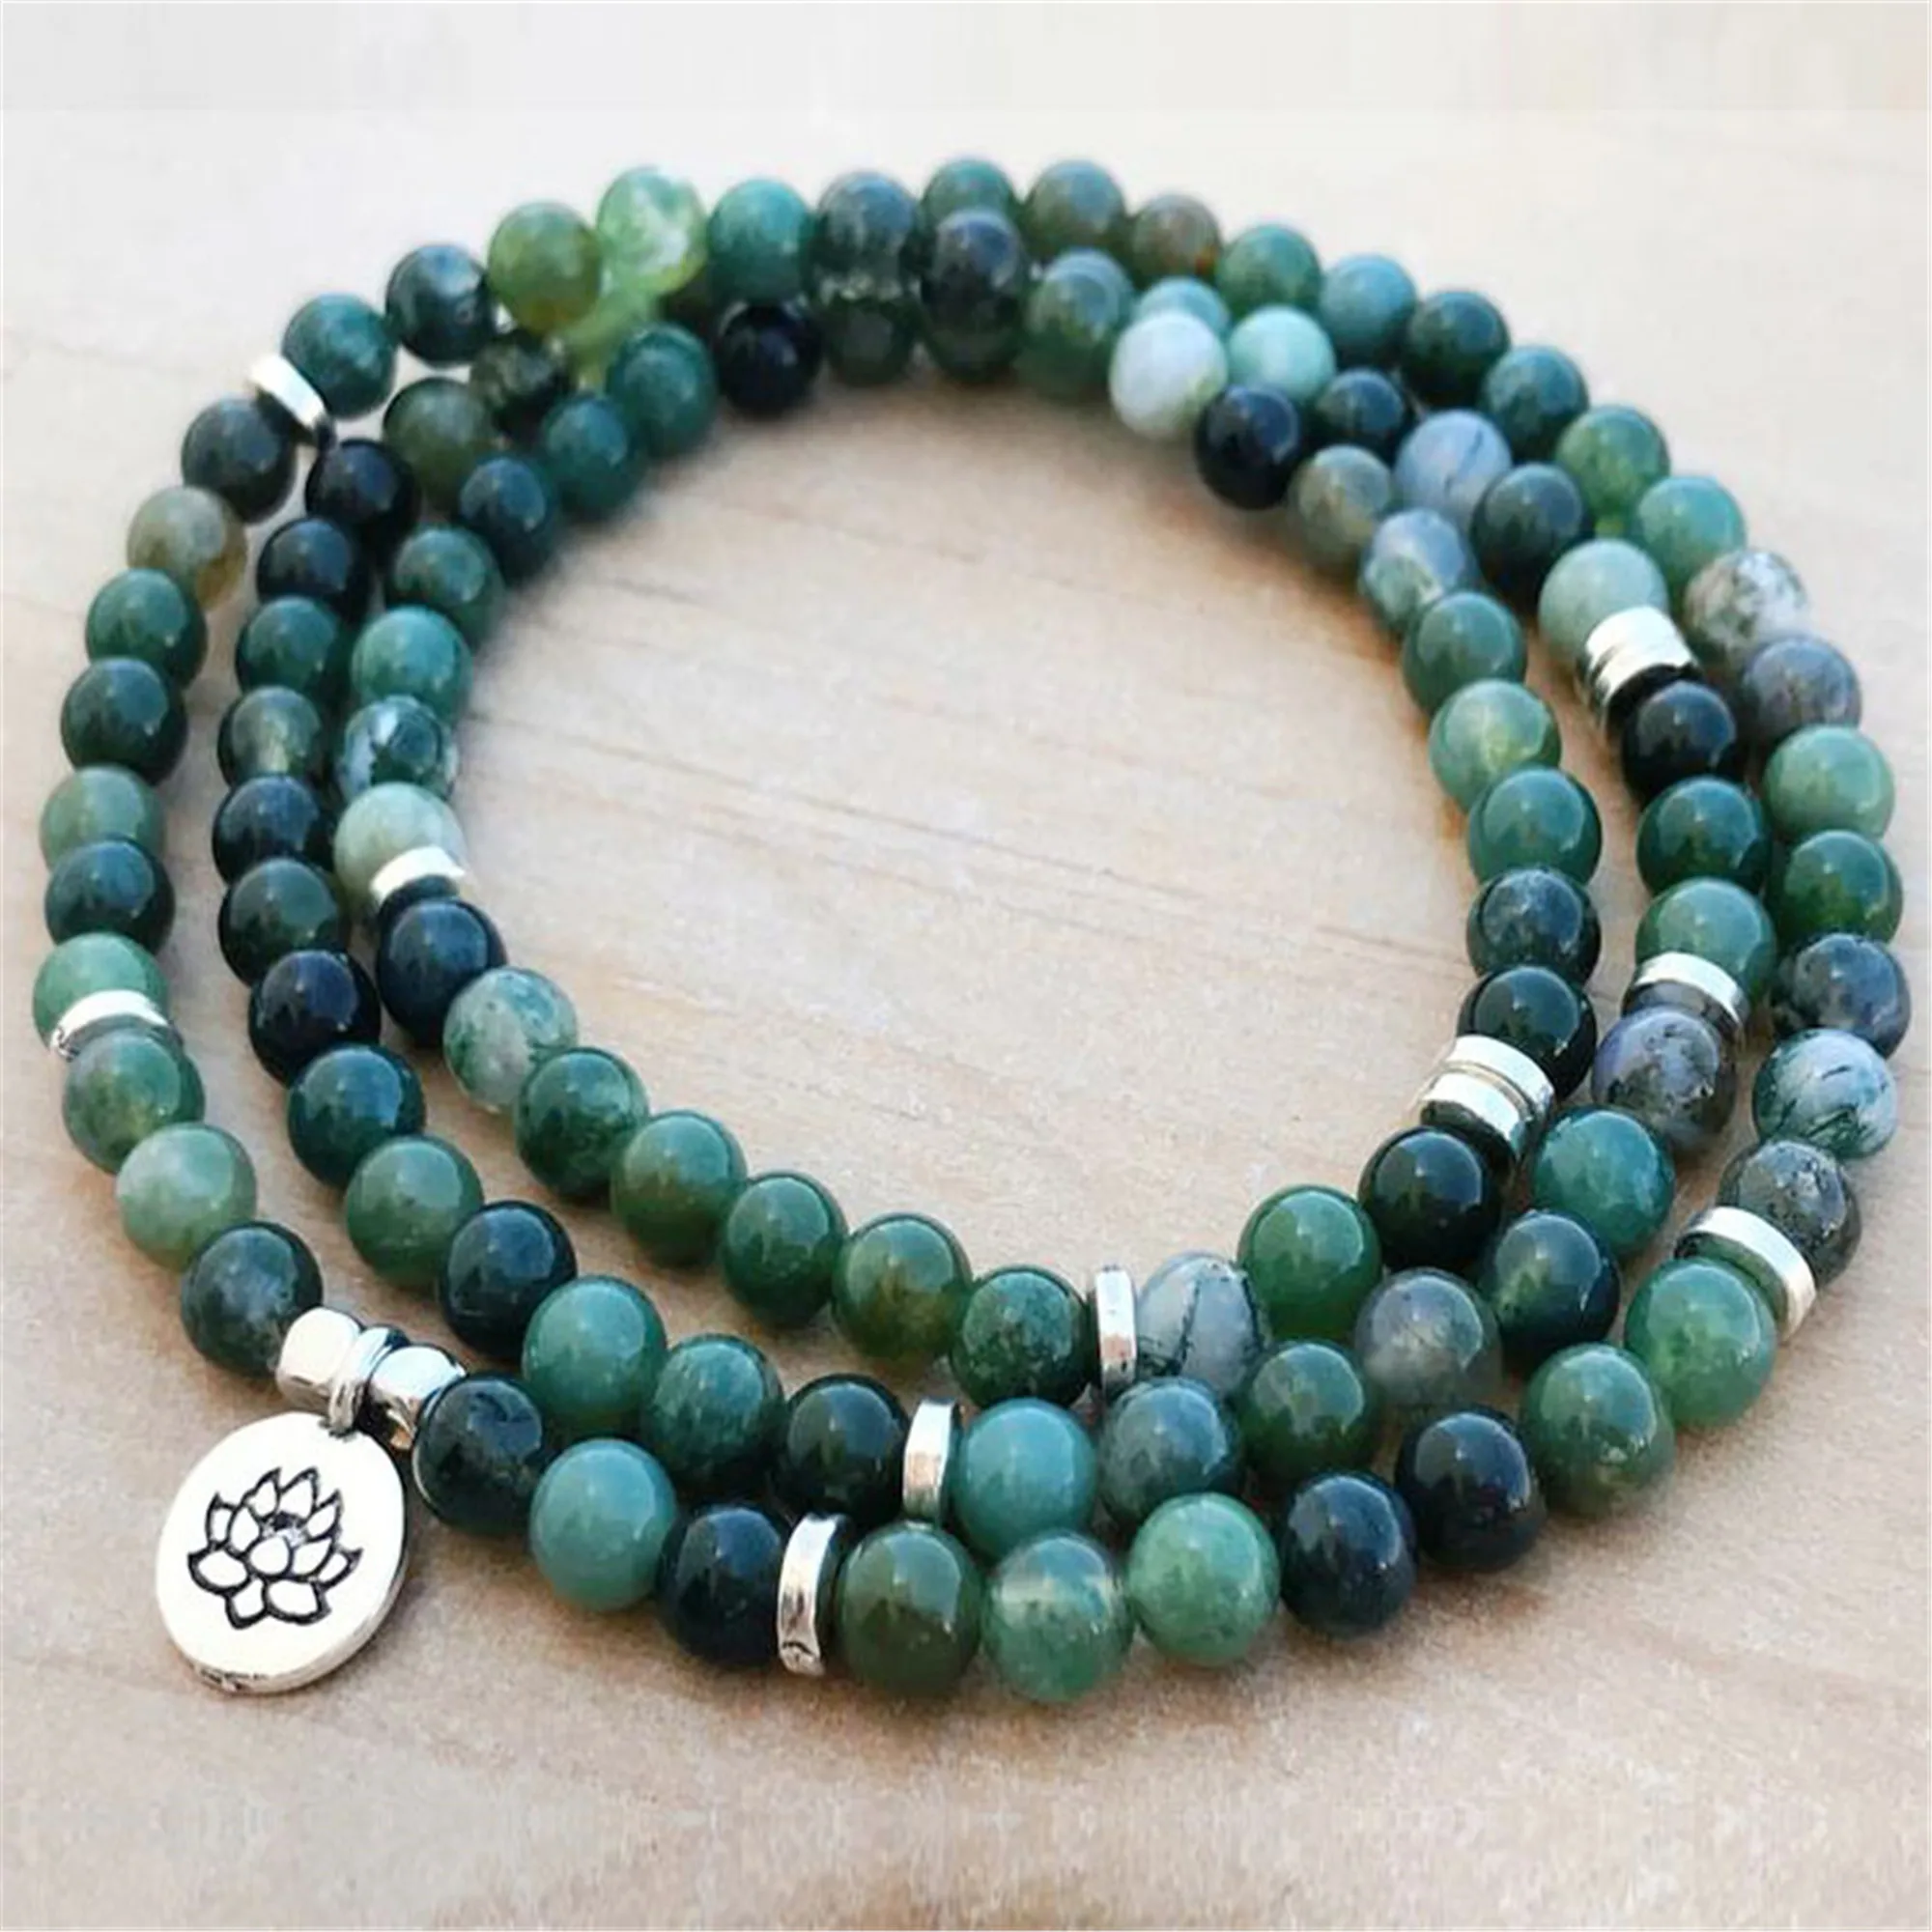 

6mm Natural Moss Agate 108 Beads Pendant Bracelet Party Unisex Fabric Contemporary Casual Beaded Jewelry Lovers Minimalist